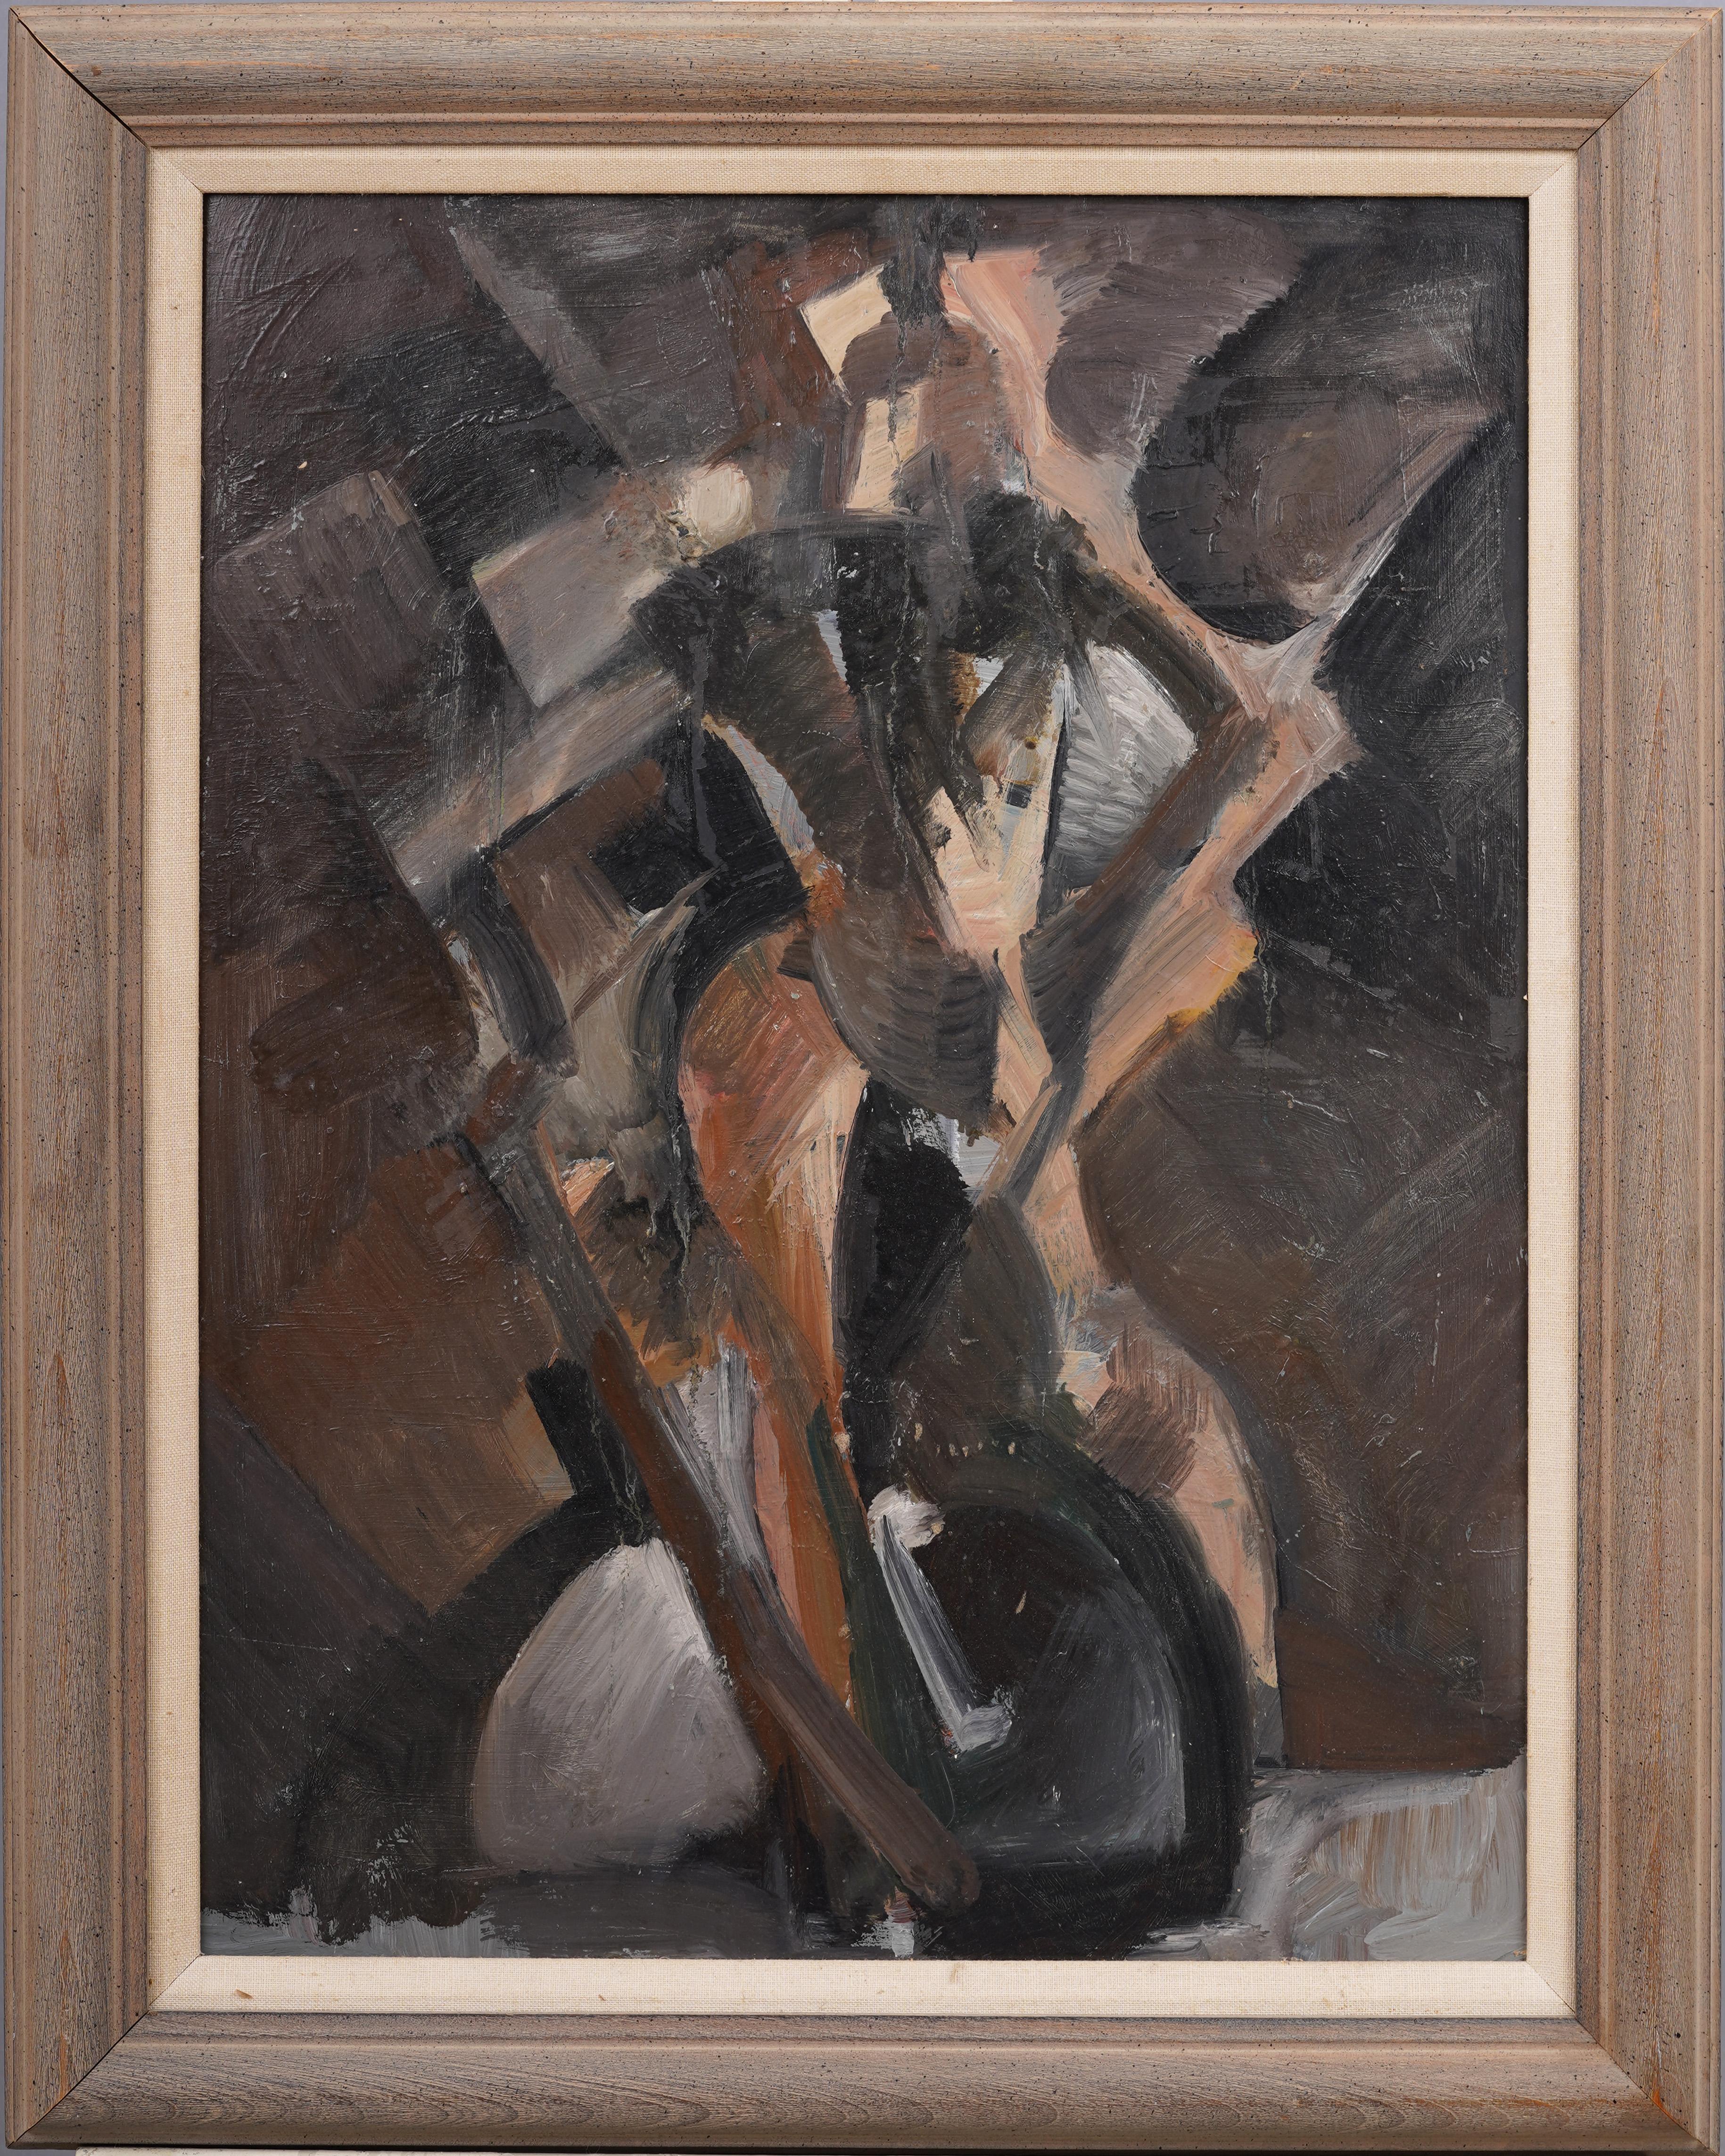 Very well painted period cubist still life.  Oil on canvasboard.  Framed.  No signature found.